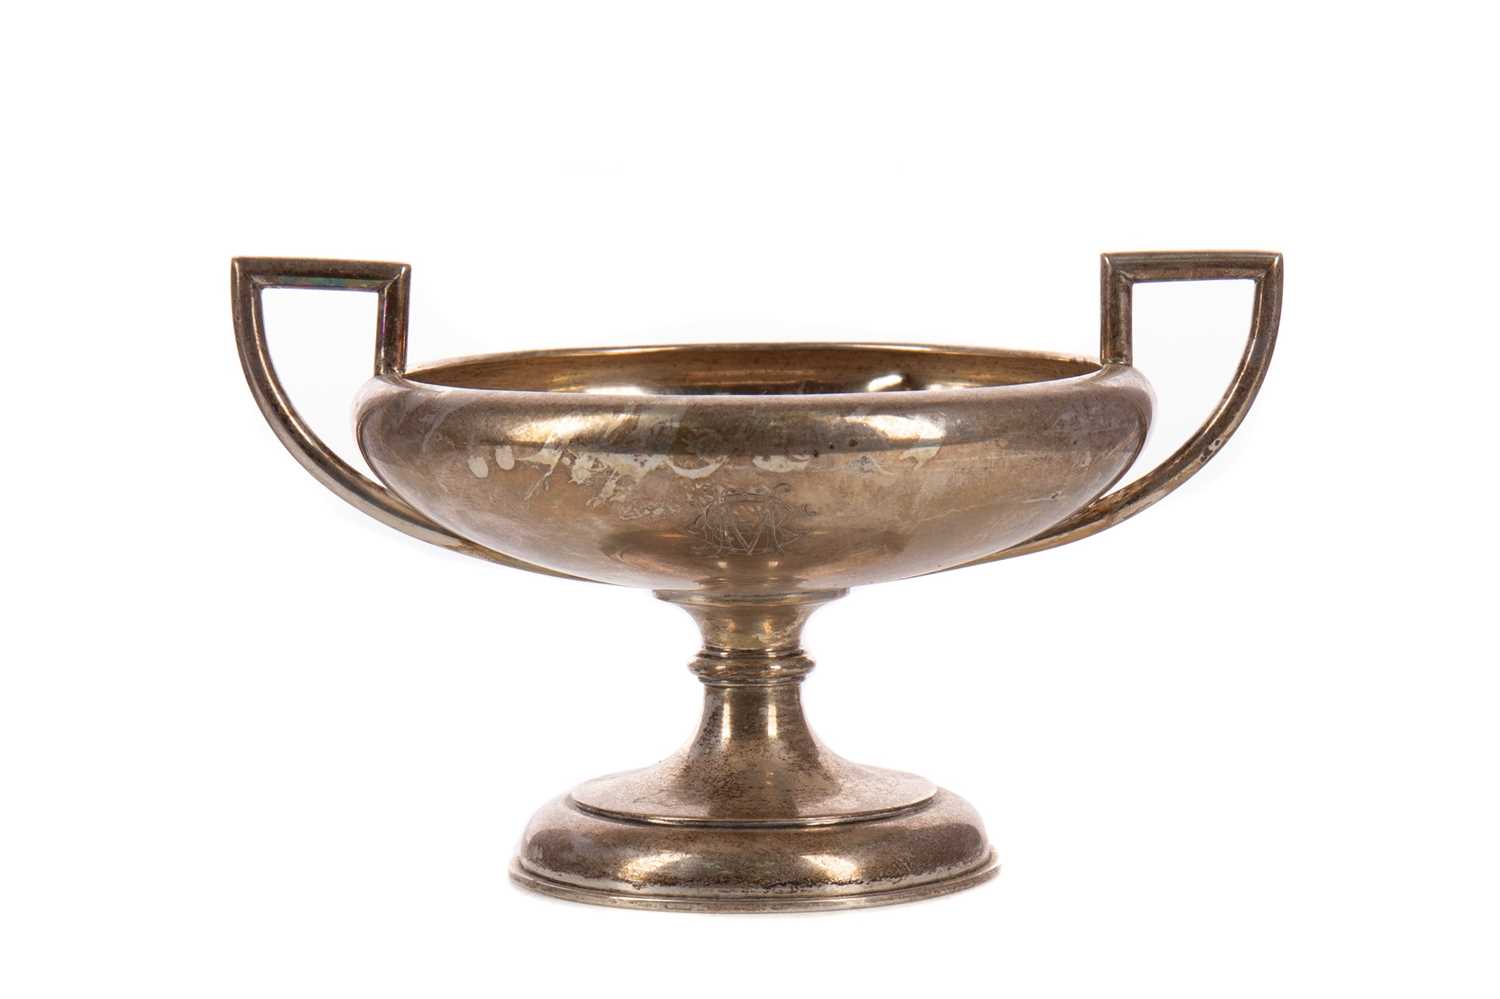 Lot 549 - A SILVER TWIN-HANDLED PEDESTAL BOWL BY DAVID ANDERSEN